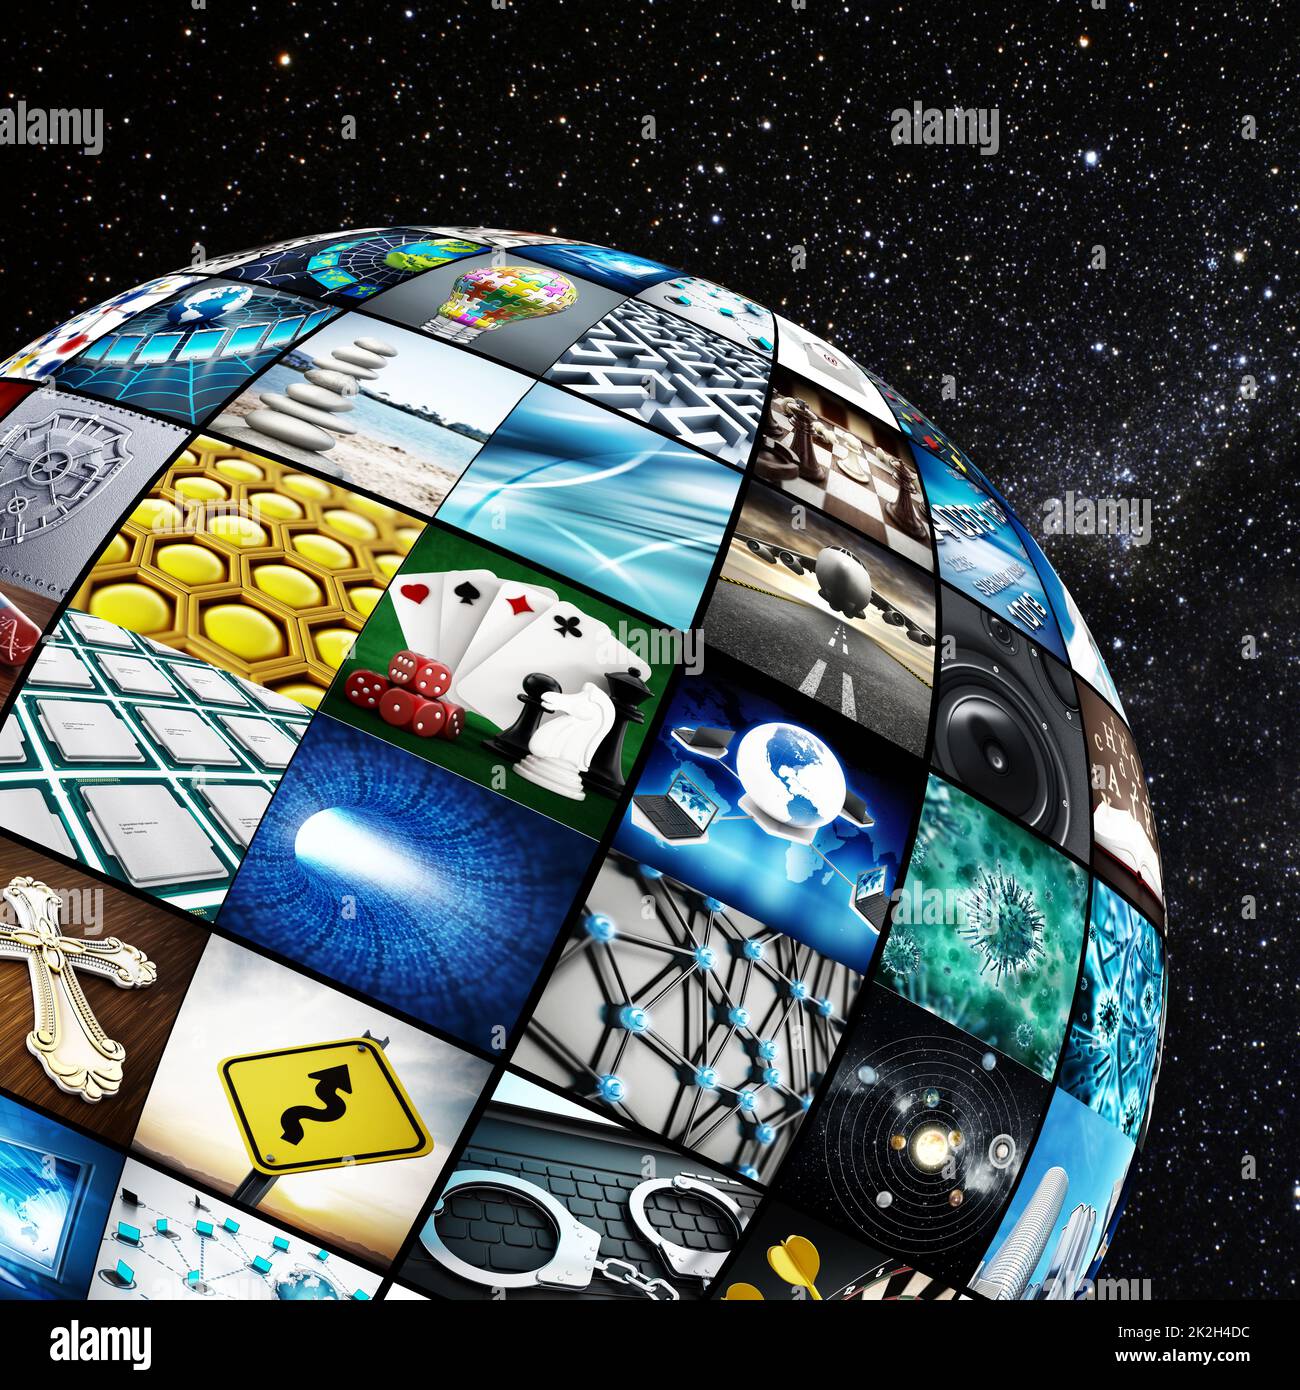 Globe covered with TV screens Stock Photo